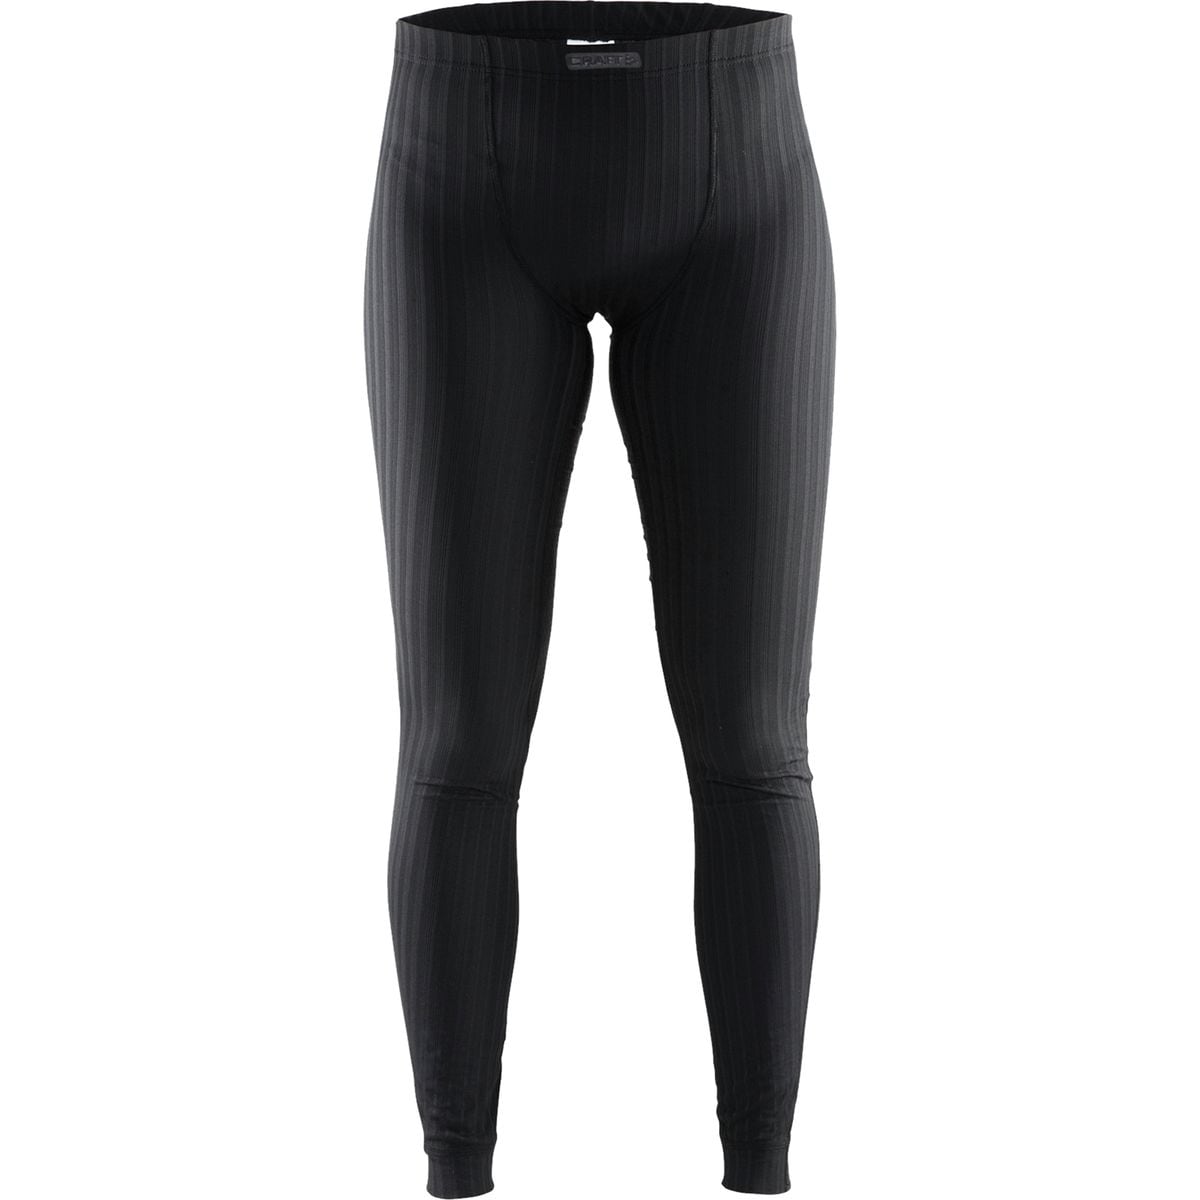 Craft Active Extreme 2.0 Pant Women's